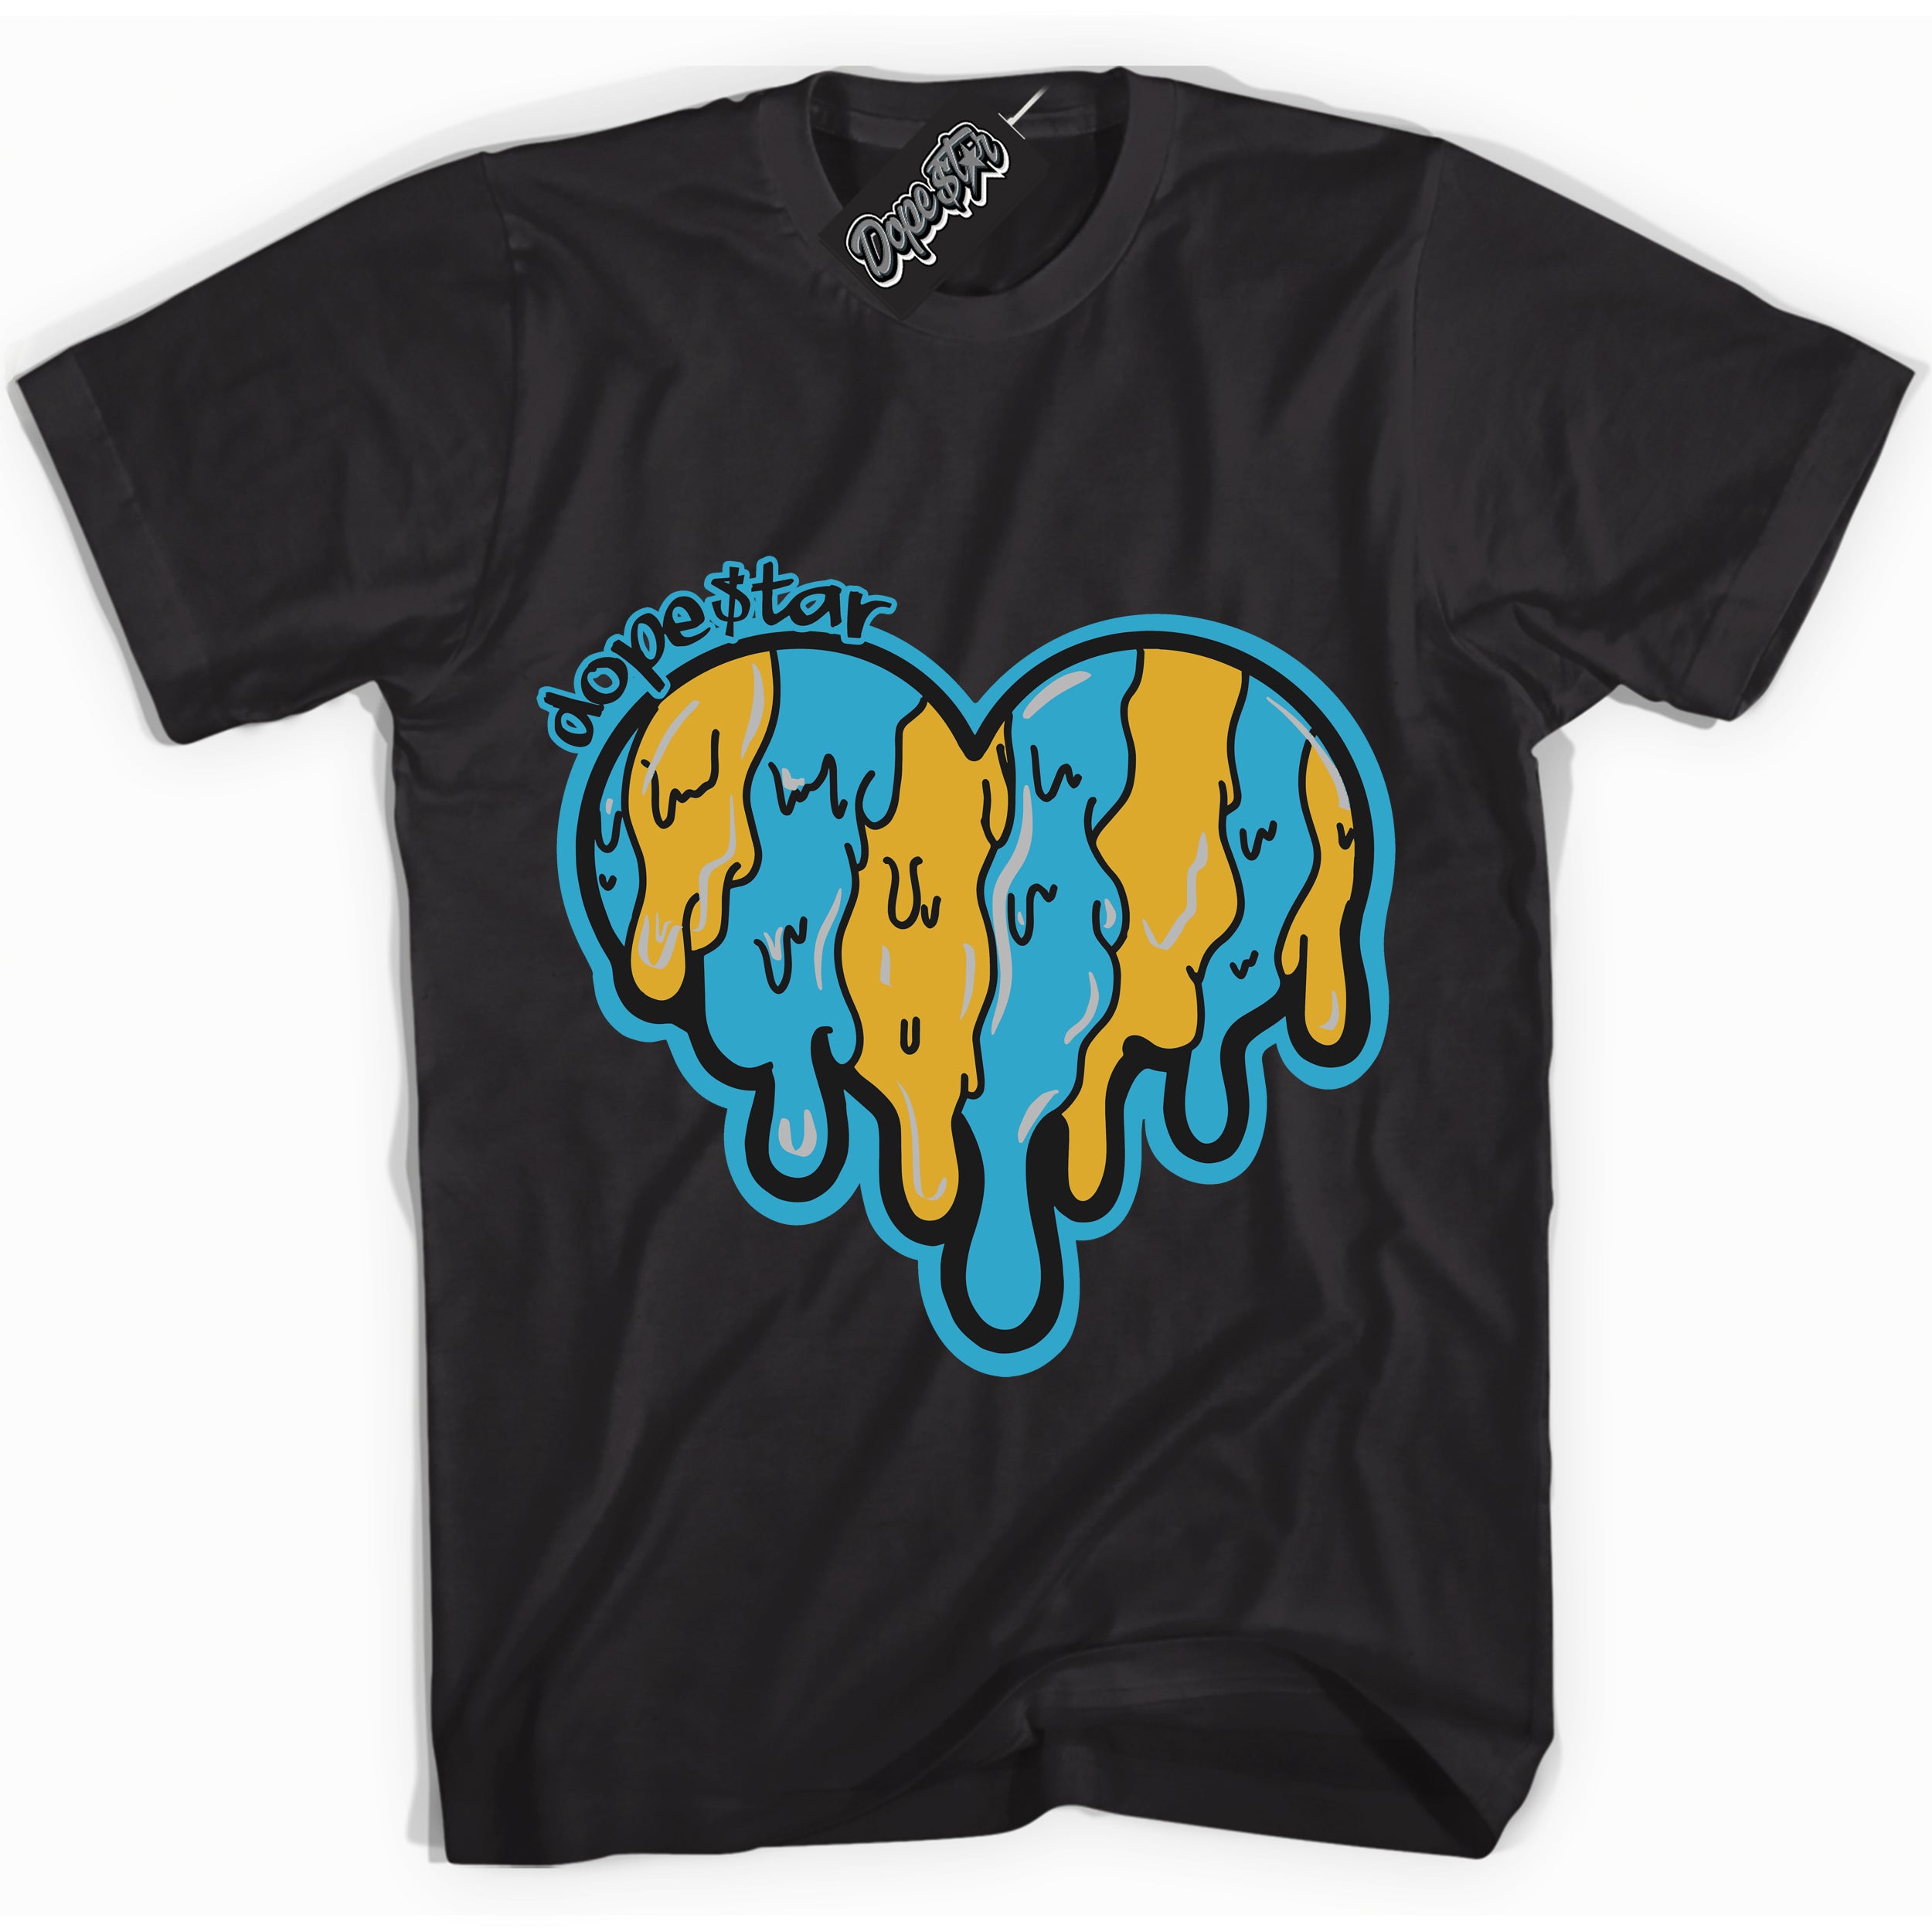 Cool Black Shirt with “ Melting Heart” design that perfectly matches Aqua 5s Sneakers.